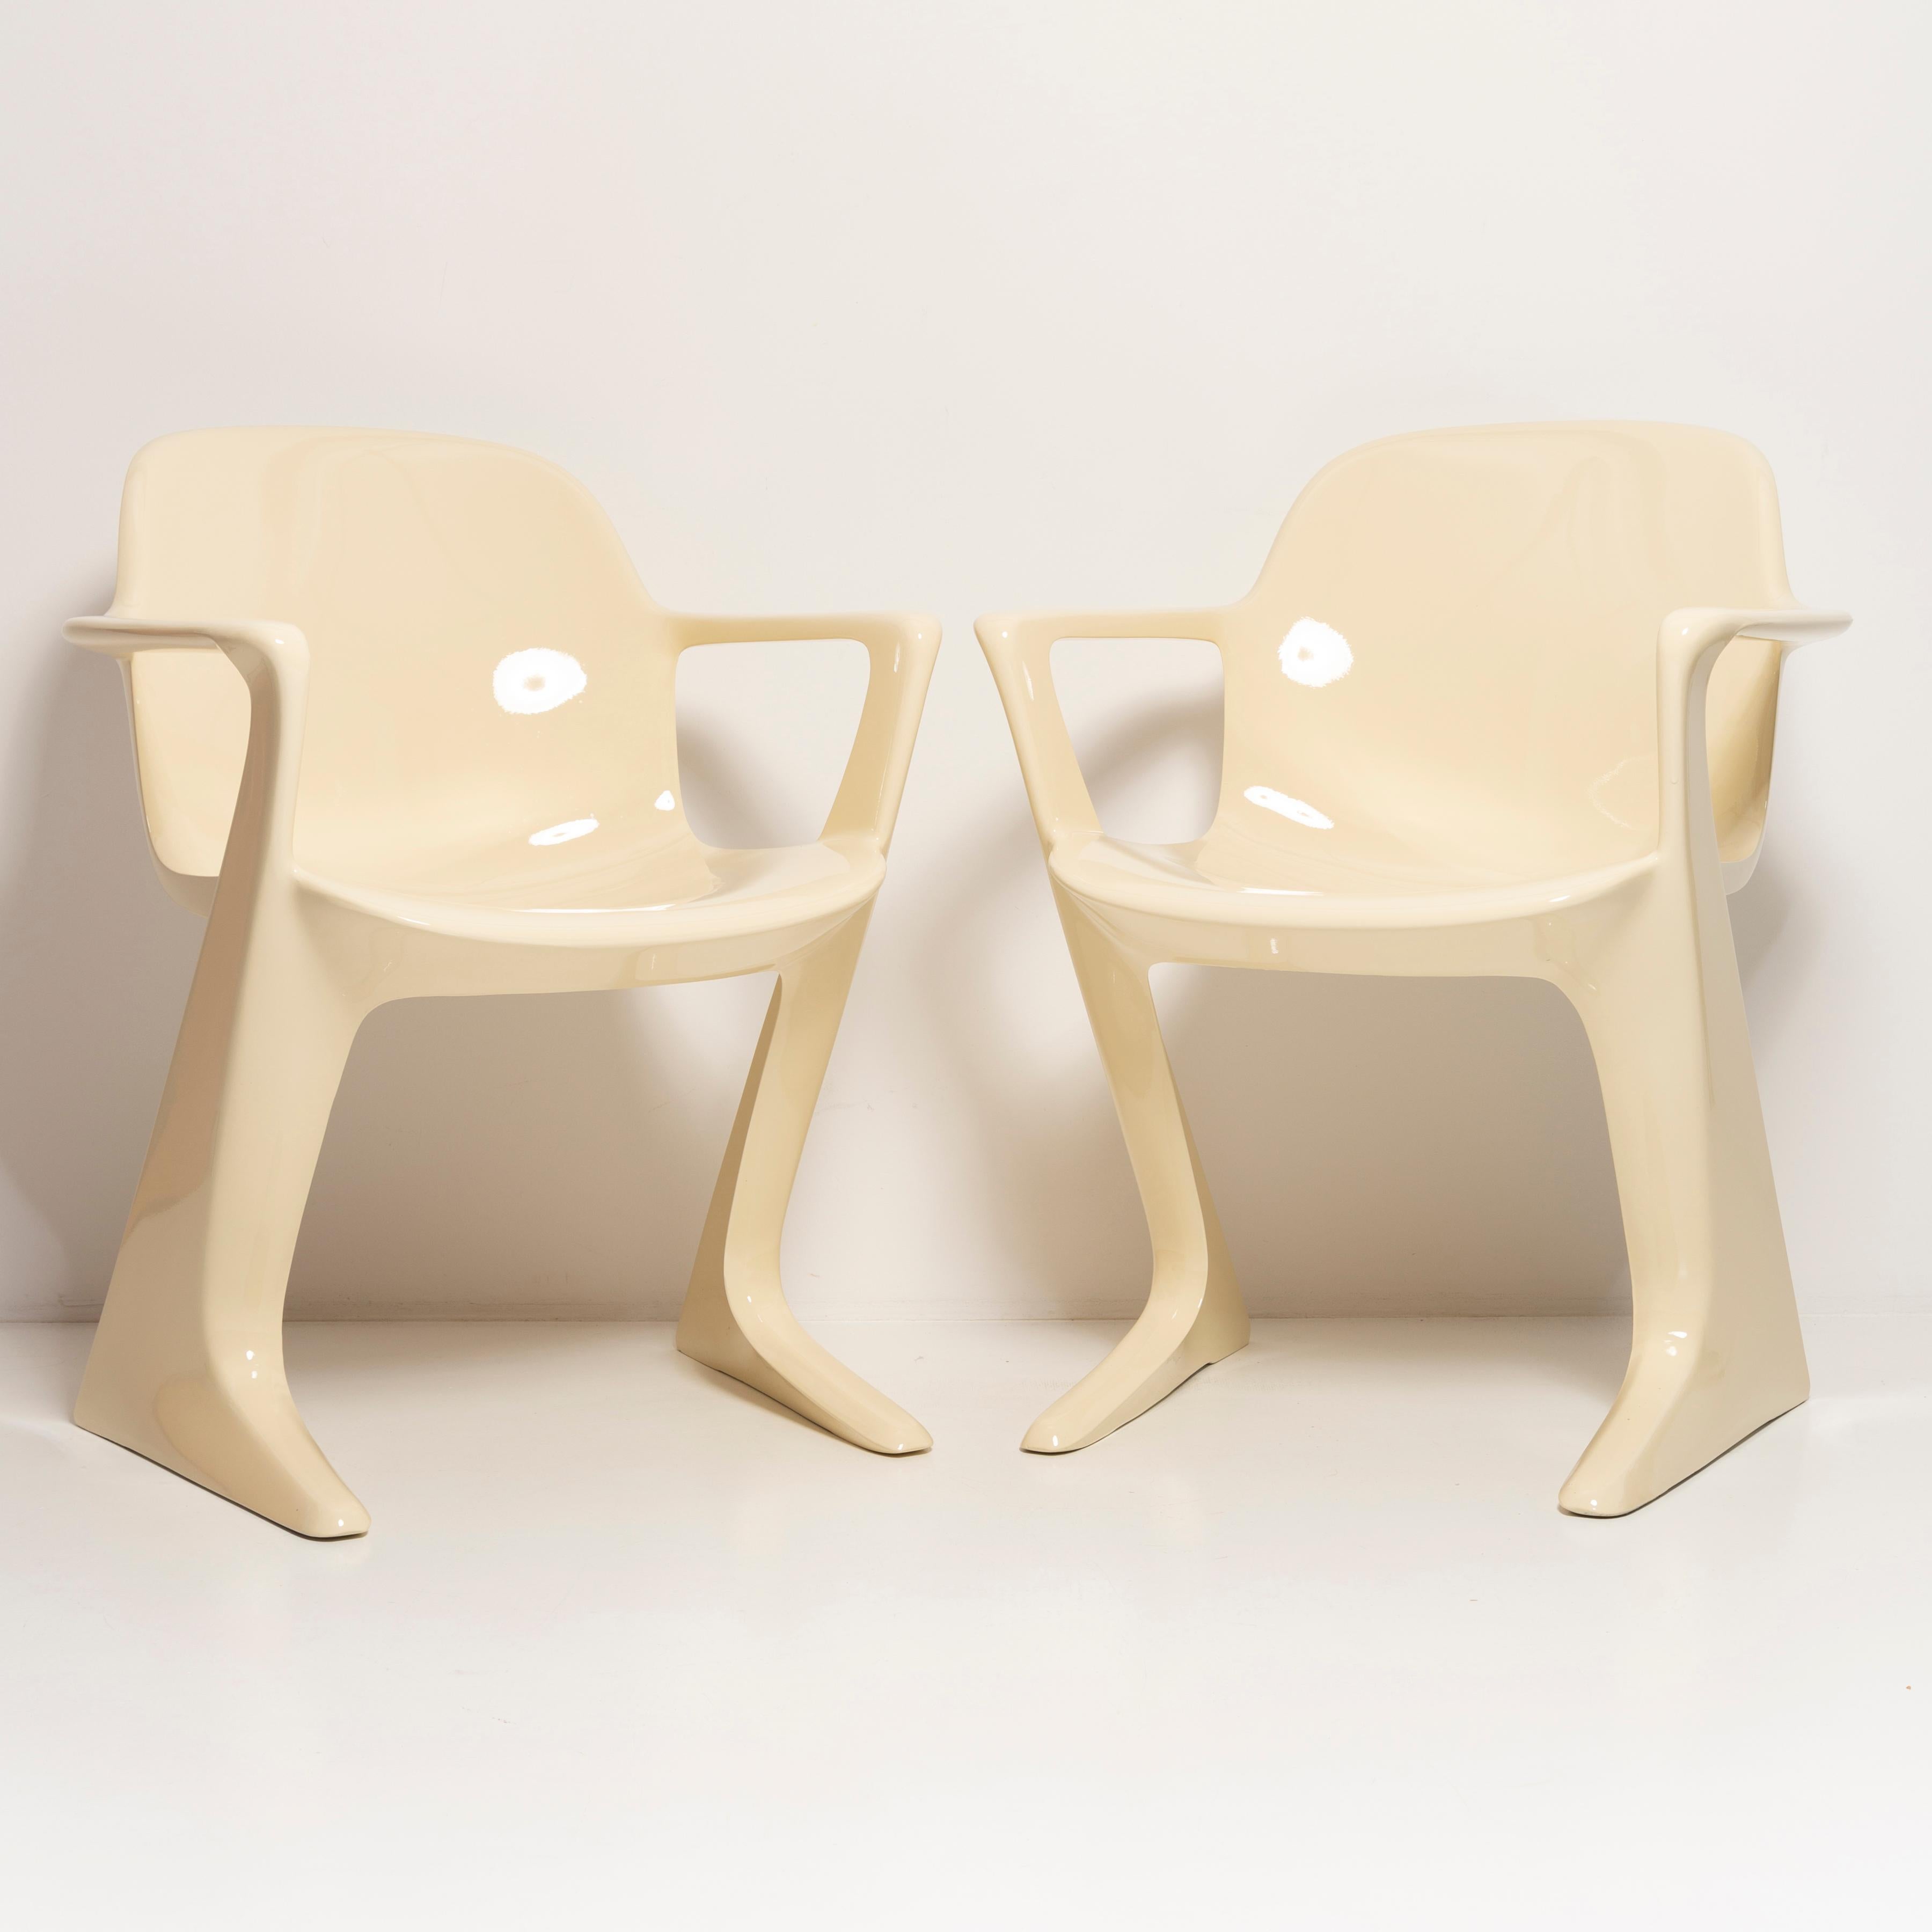 This model is called Z-chair. Designed in 1968 in the GDR by Ernst Moeckl and Siegfried Mehl, German Version of the Panton chair. Also called kangaroo chair or variopur chair. Produced in eastern Germany.

The z.stuhl, designed by Ernst Moeckl